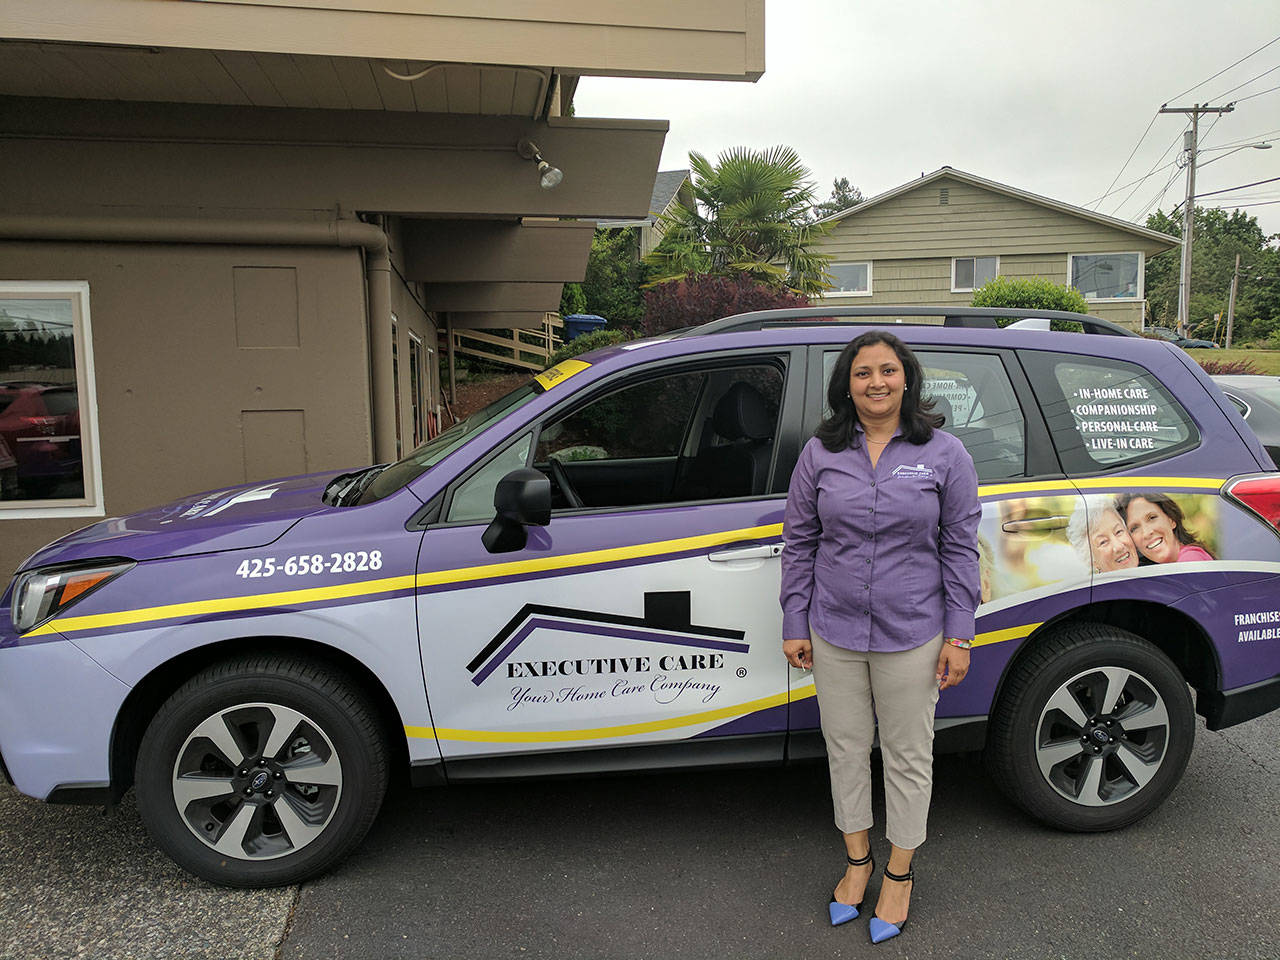 Kirkland resident Aarti Bindlish owns the new Executive Care branch based in Bothell. Courtesy photo